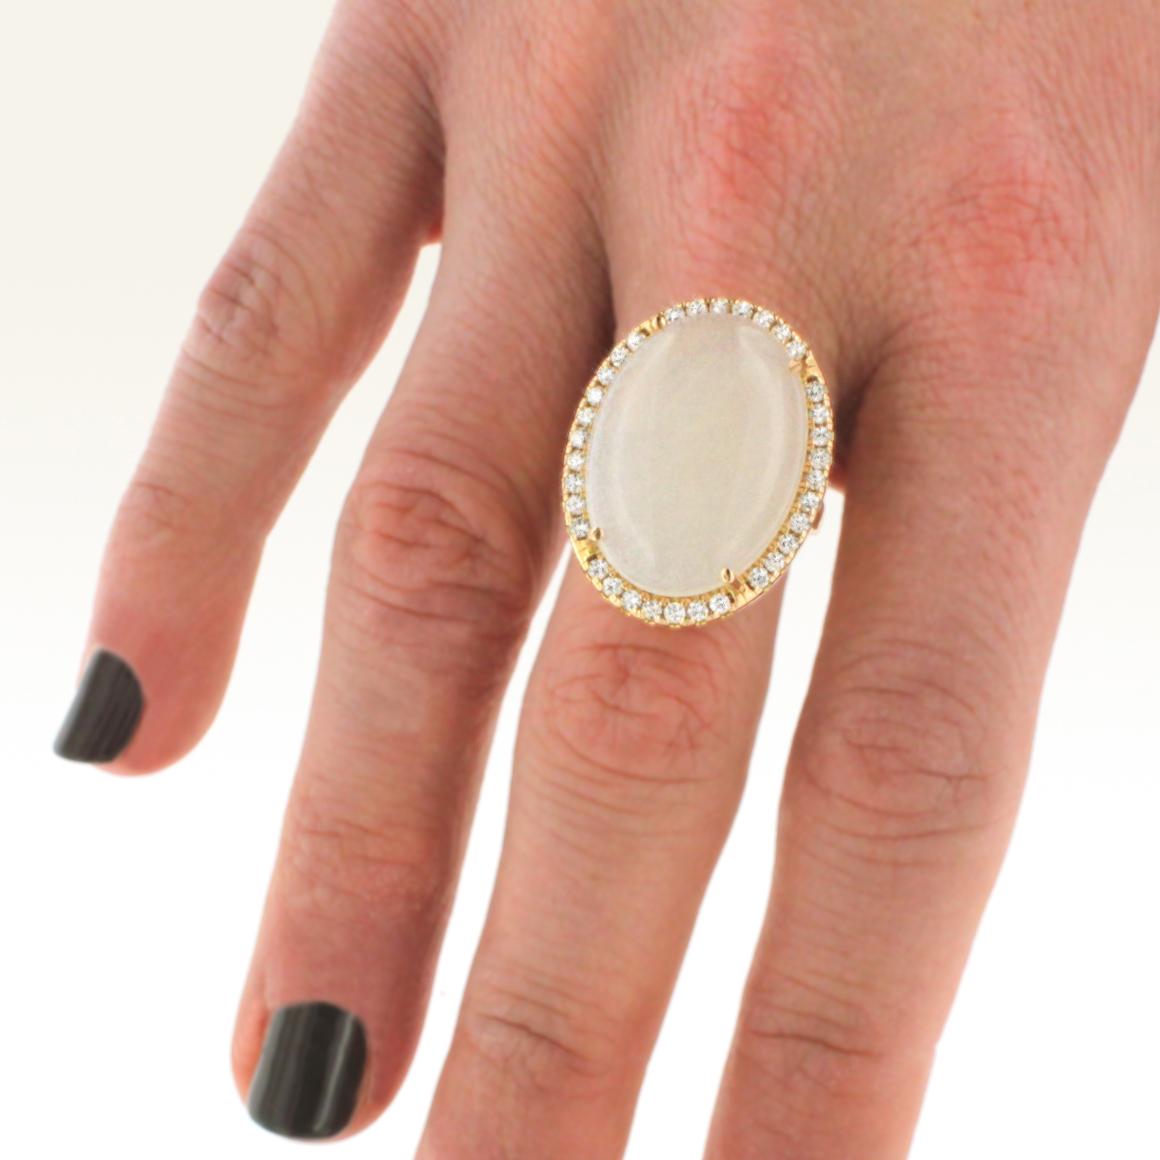 Ring 18 karat rose gold with cabochon oval white Moonstone (size: 16x22 mm) and white diamond Karats 0,55  
Very elegant Ring by Stanoppi Jewellery , Made in Italy 
The Moonstone creates serenity and carelessness.The iridescent white color creates a